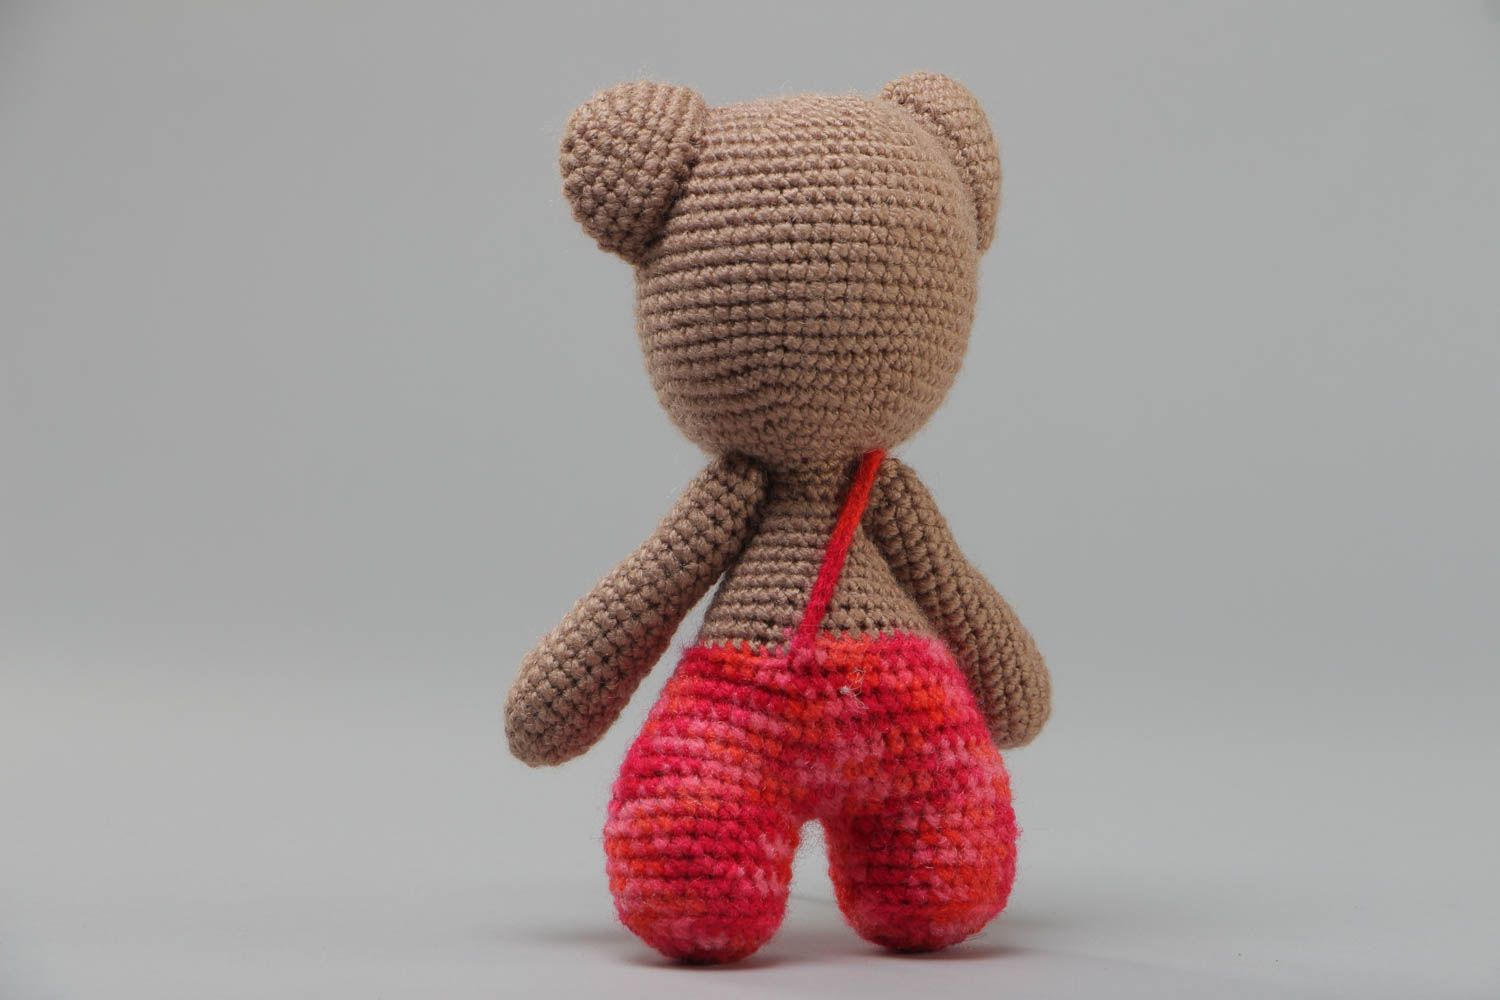 Small handcrafted soft crocheted teddybear for children made using knitting needle photo 4